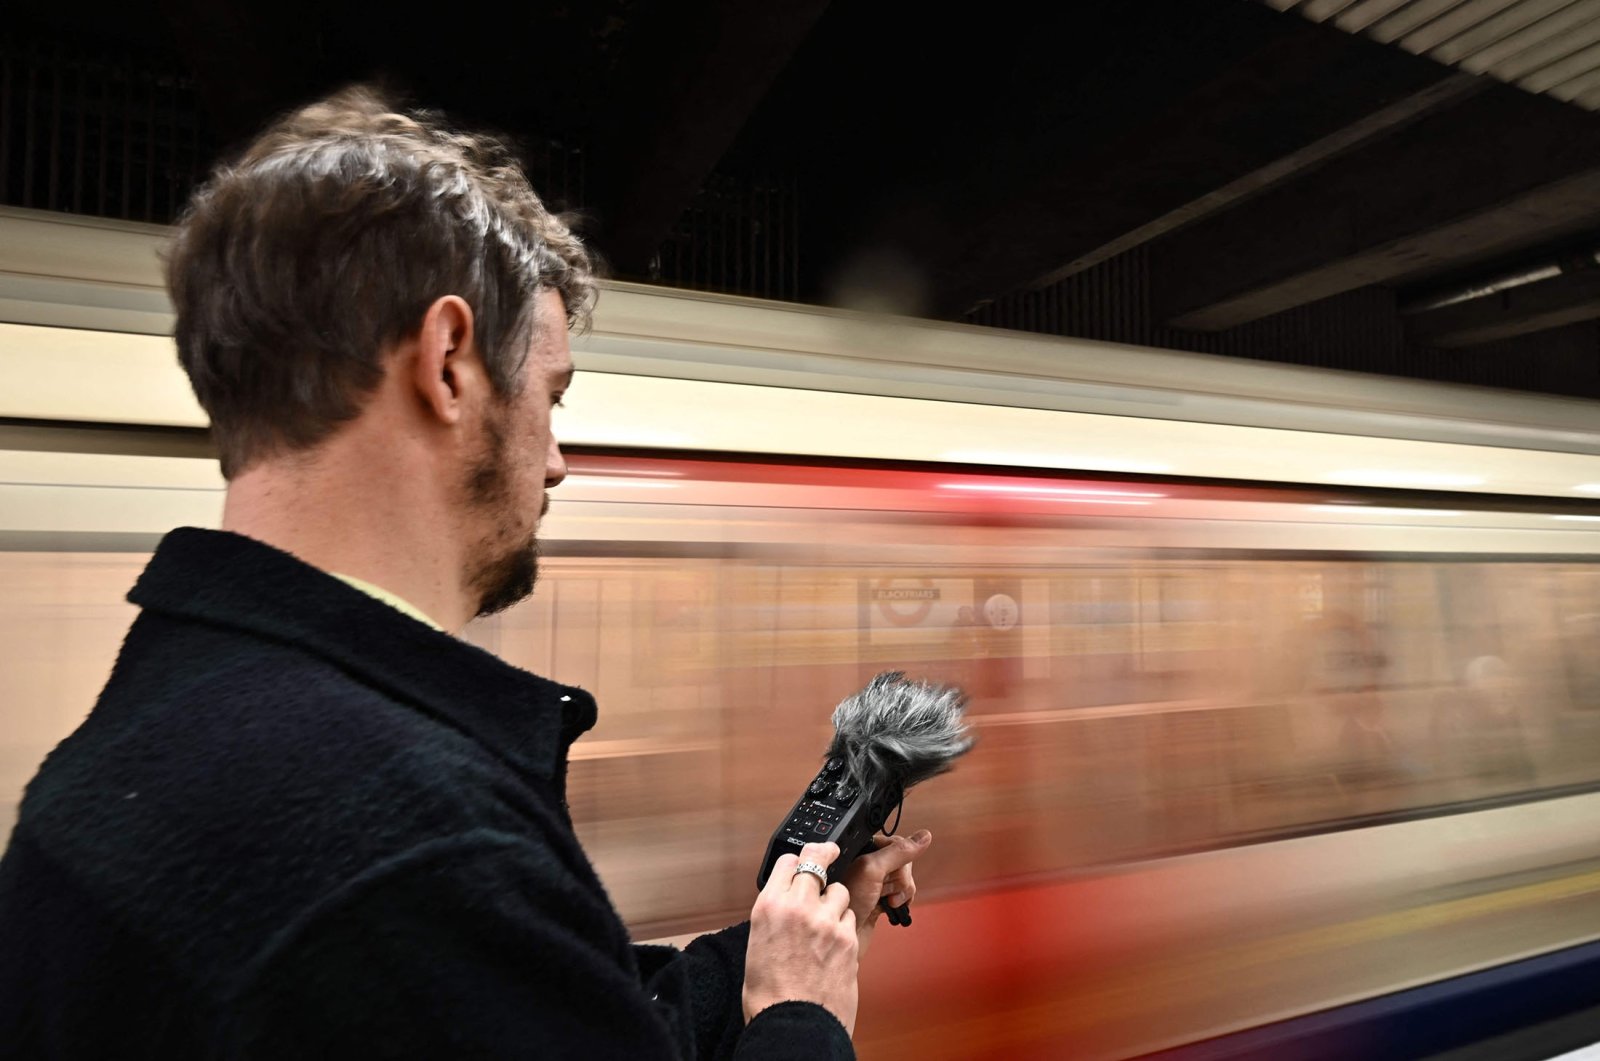 Musician and sound artist Stuart Fowkes records the sound of a passing London Underground train at Blackfriars tube station in London, U.K., Nov 28, 2022. (AFP Photo)